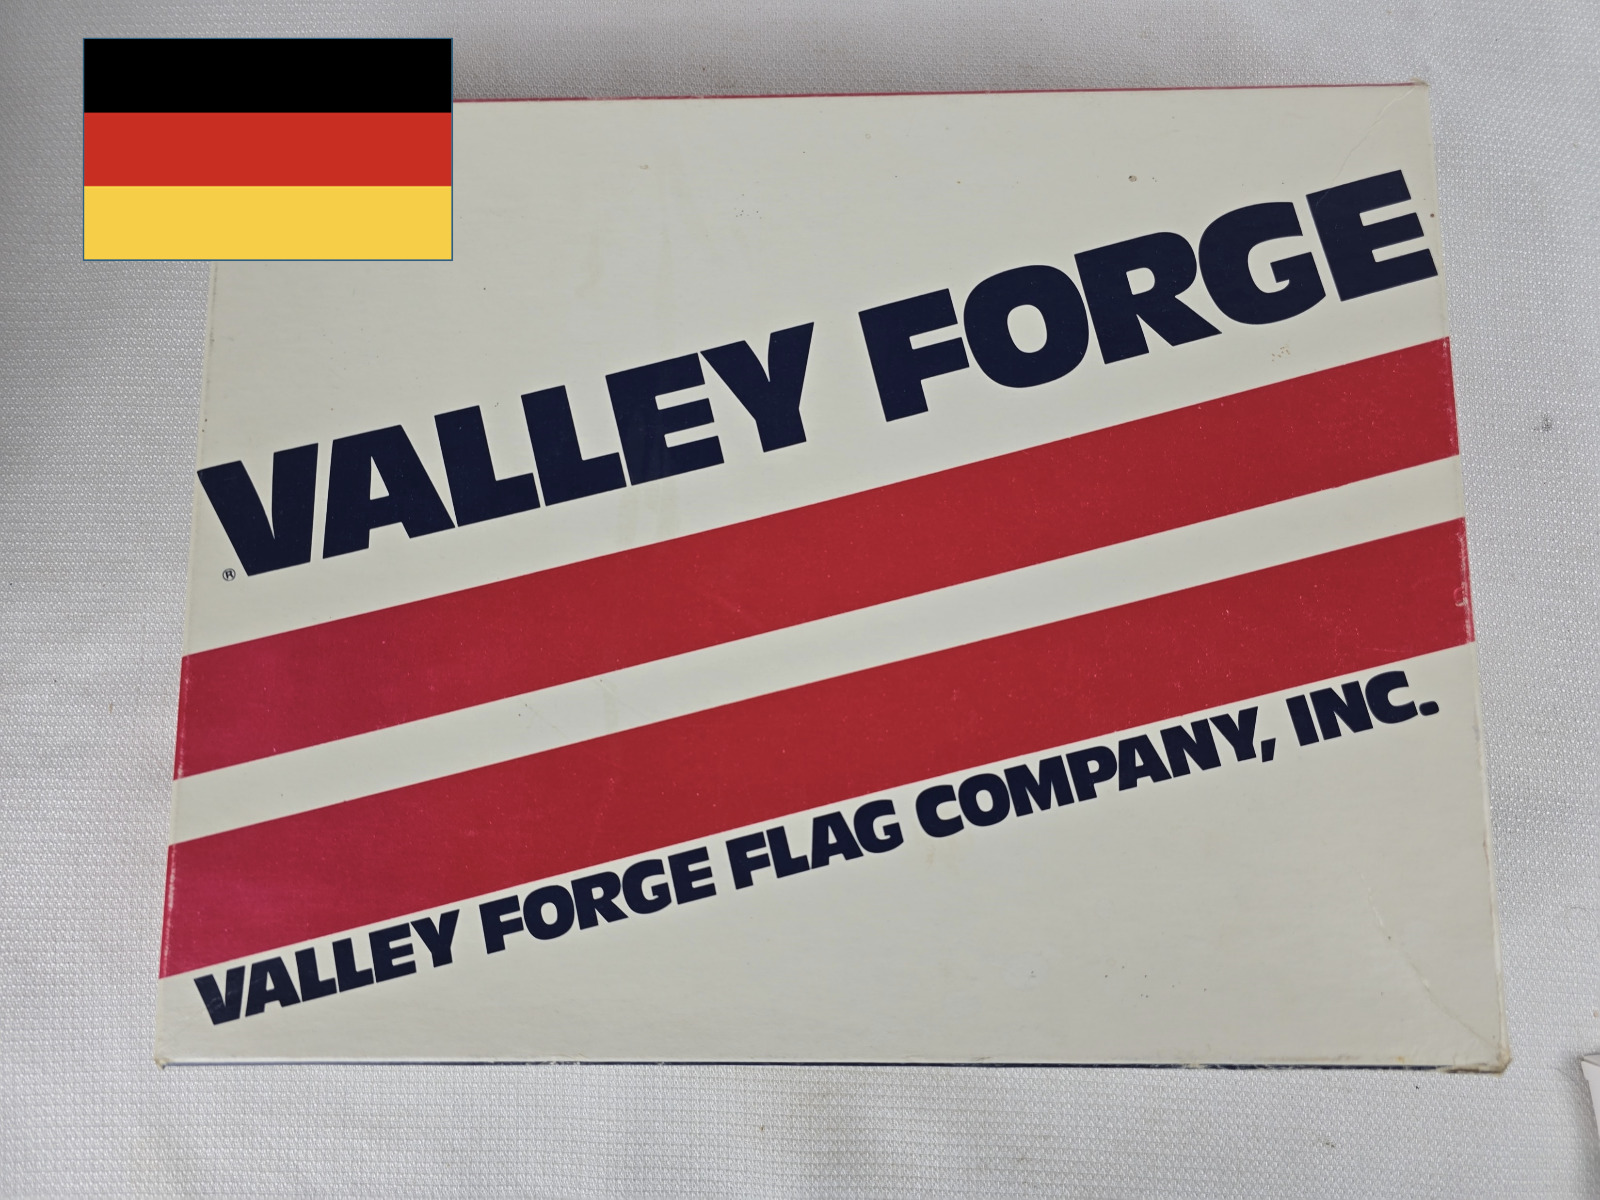 Valley Forge 3' by 5' Federal Republic of Germany Flag